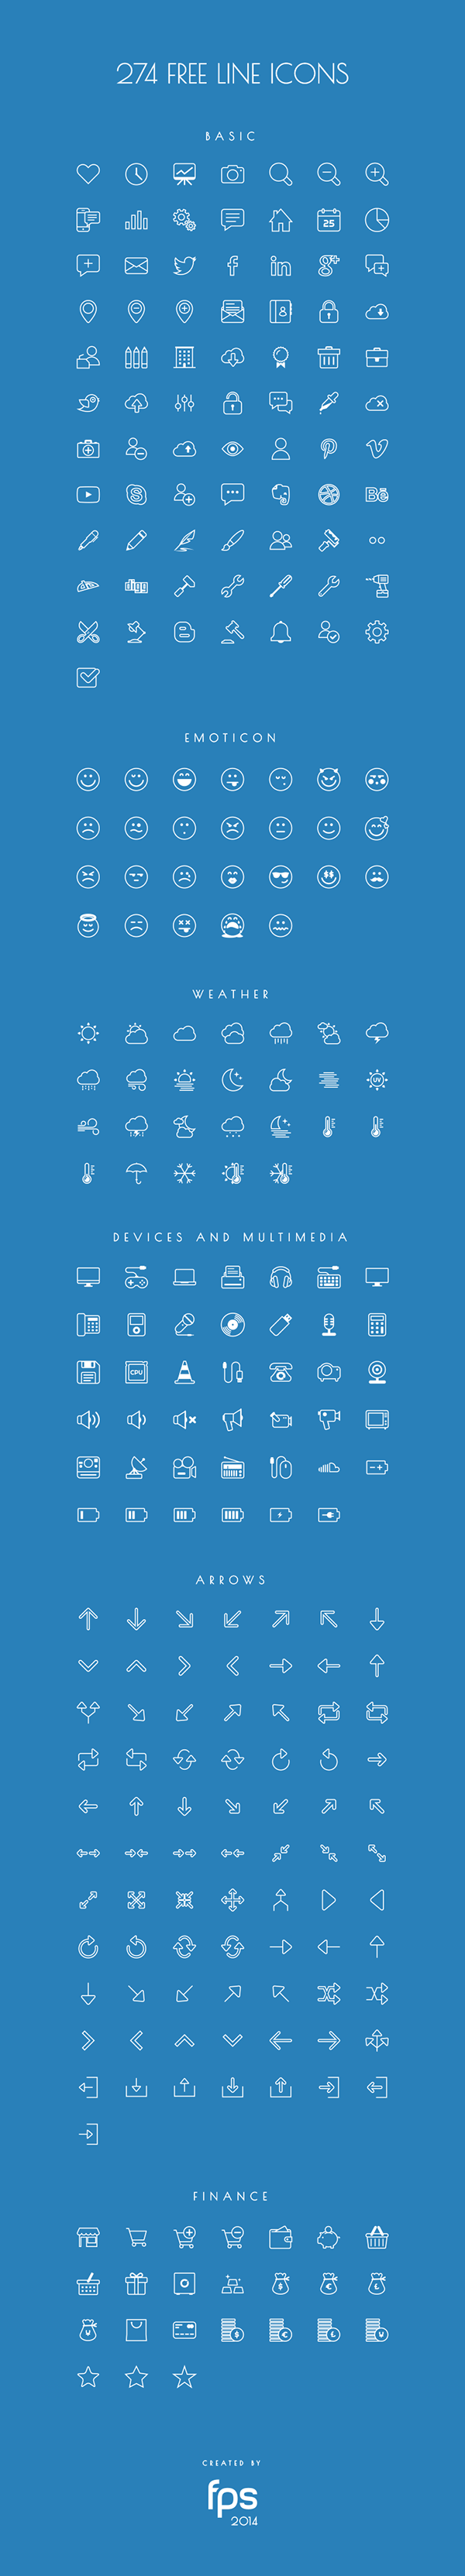 274 Vector Line Icons for free